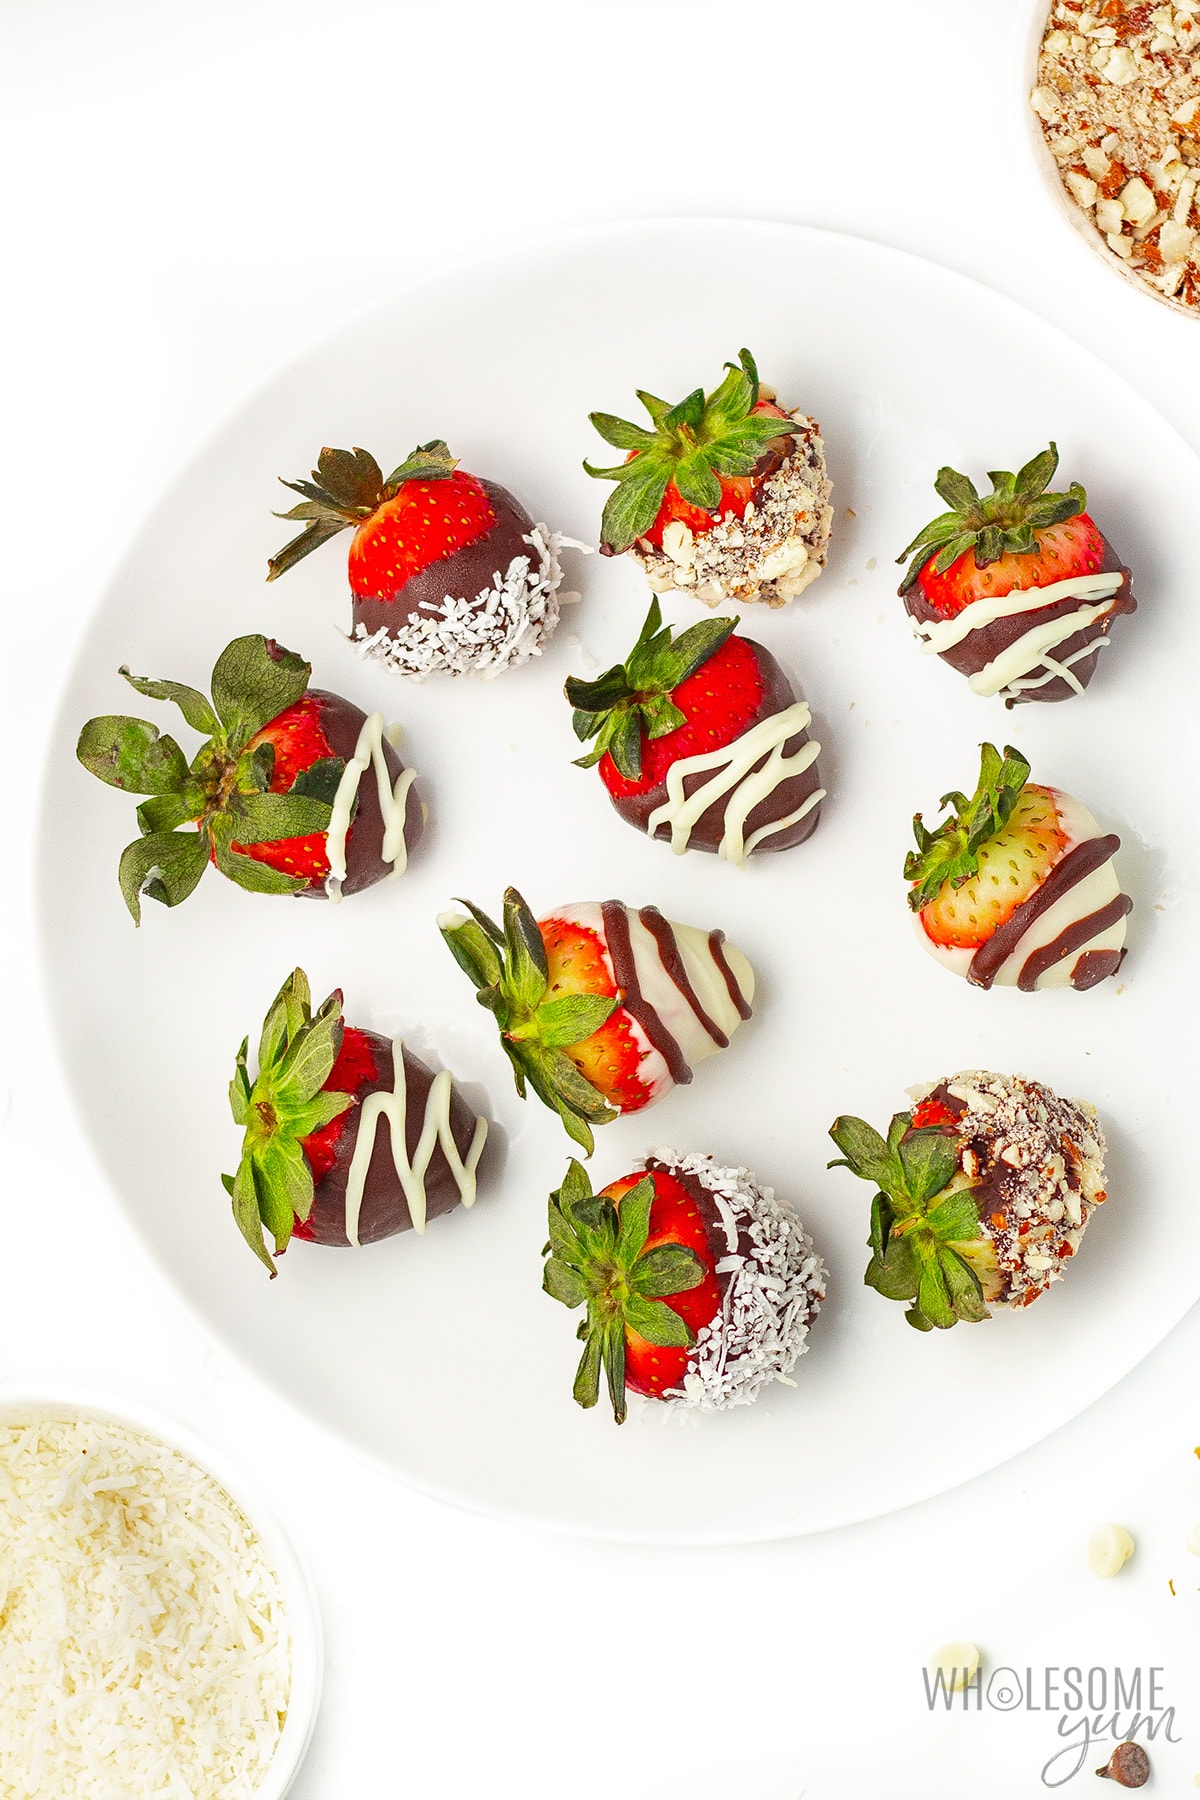 Low carb chocolate covered strawberries with nuts and coconut garnishes.